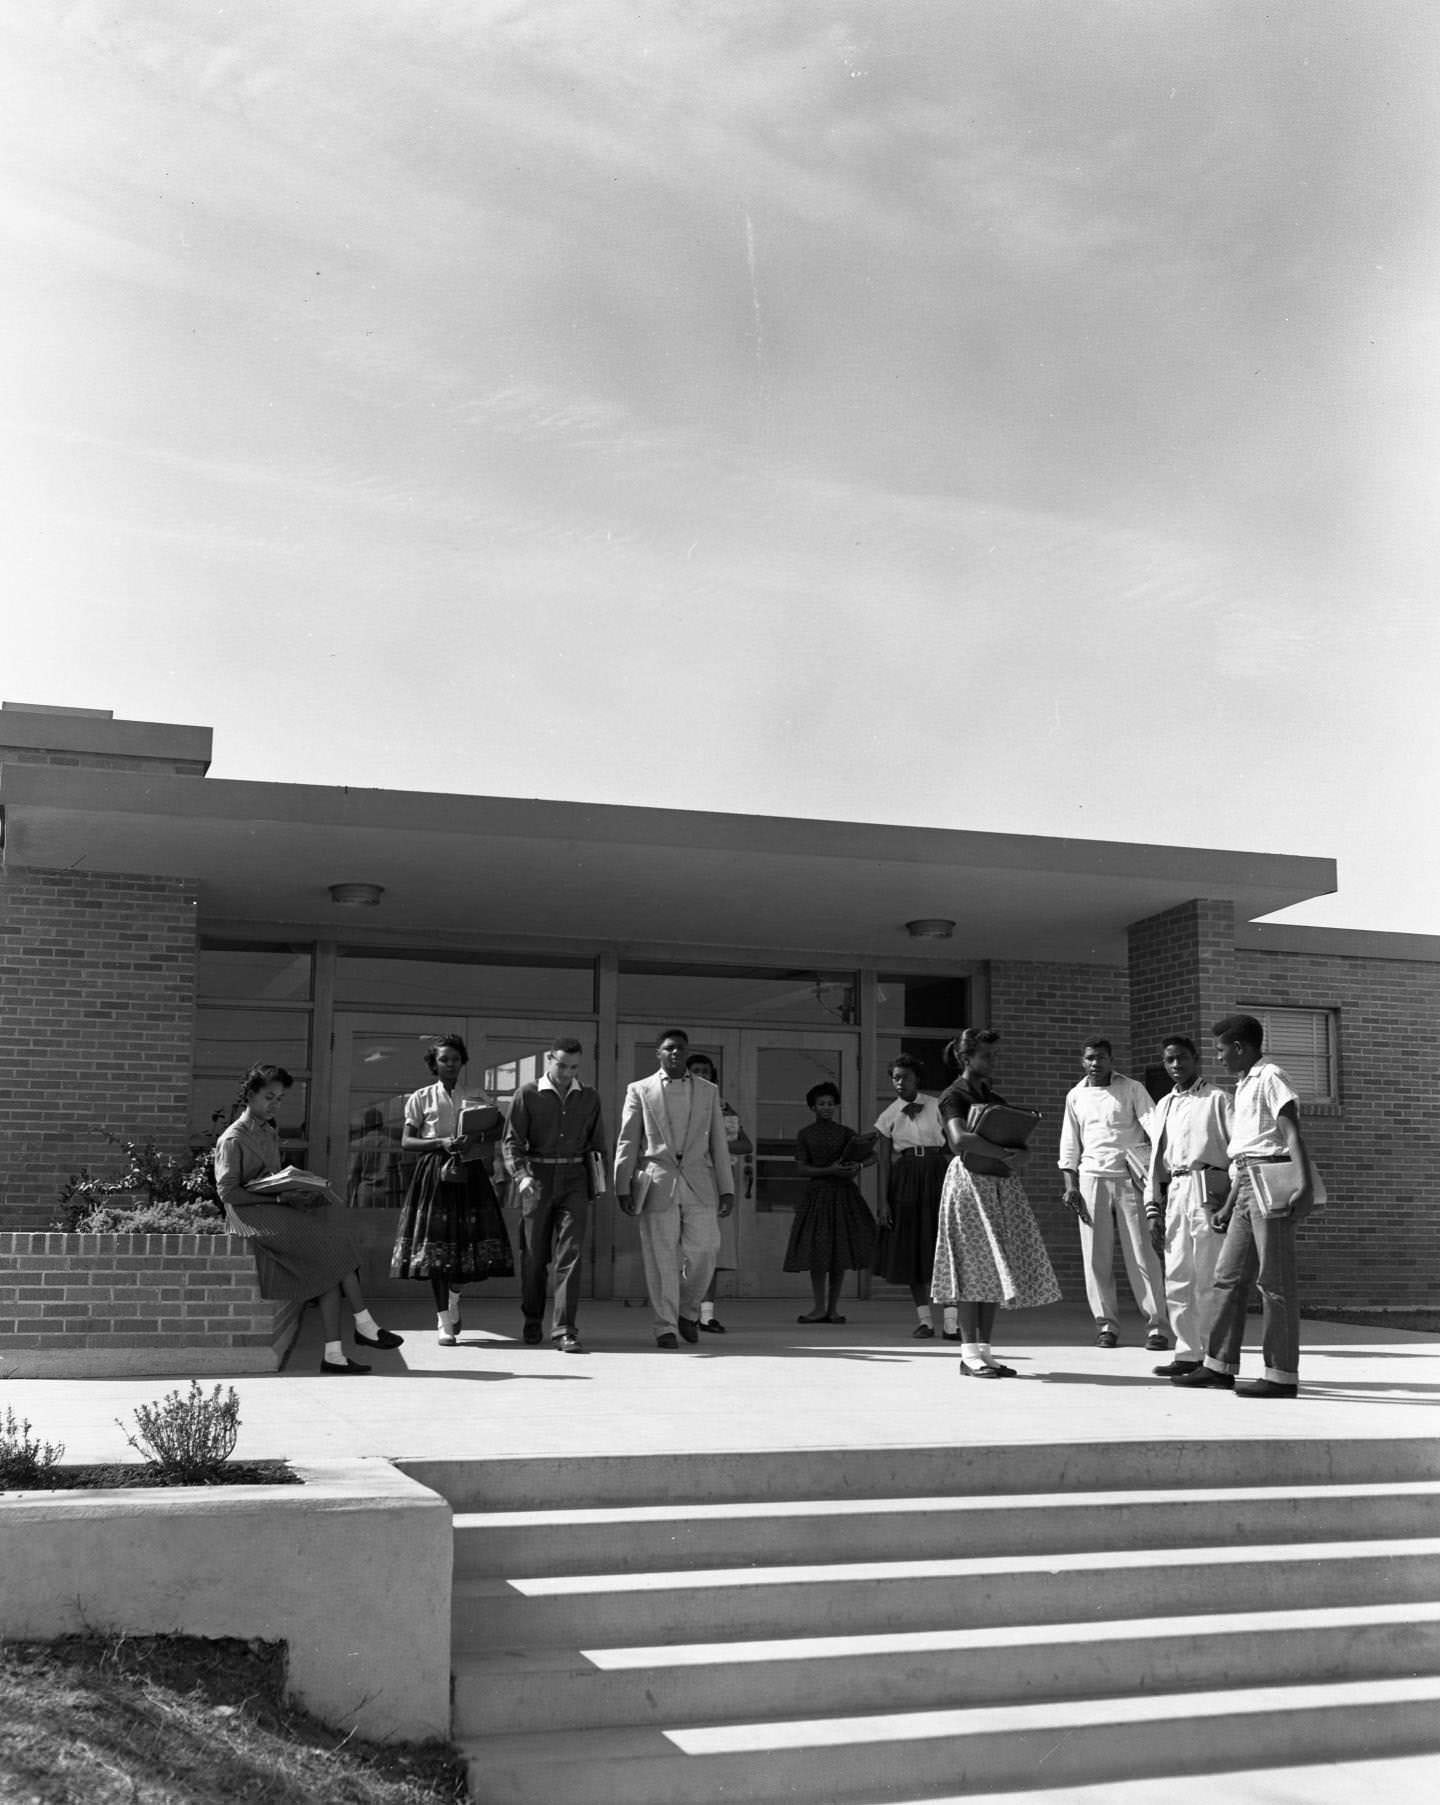 A group of students outside the entrance to Anderson High School, 1956